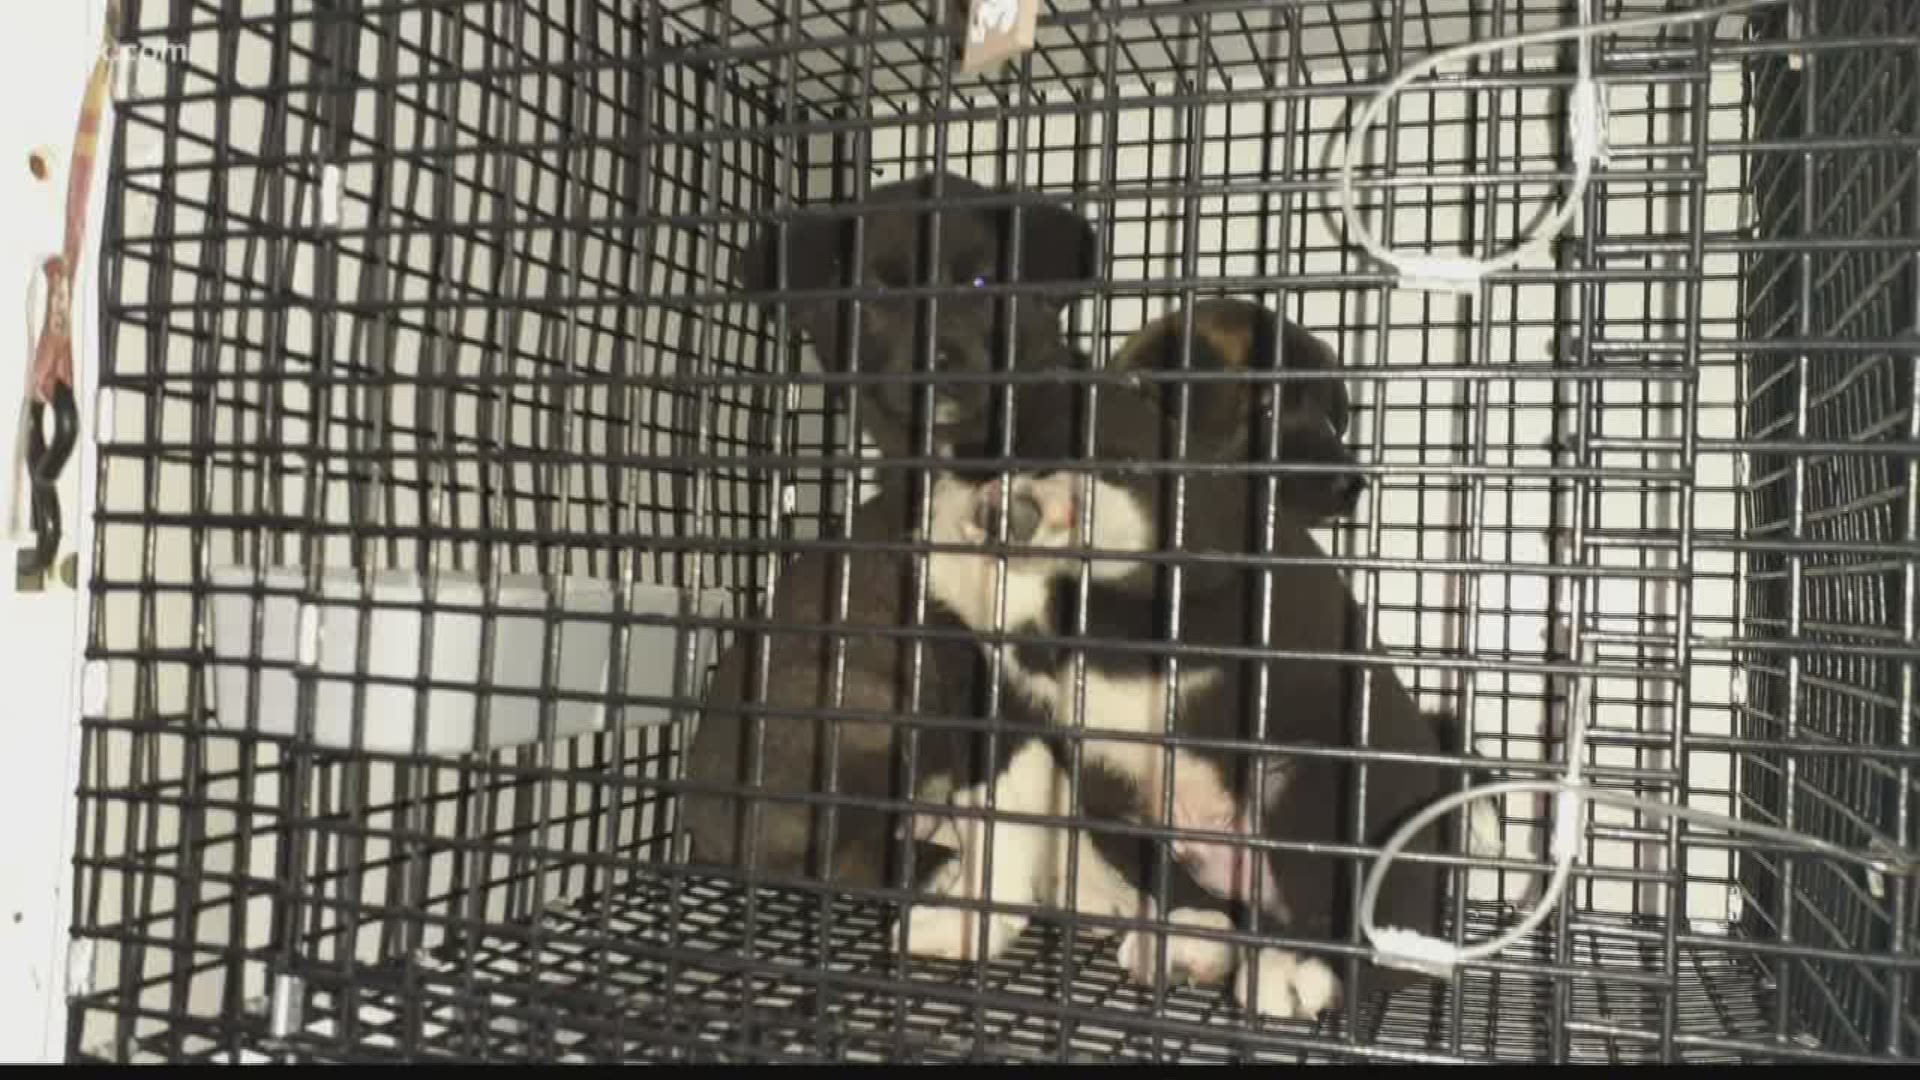 97 puppies were found in one van at a gas station over the weekend